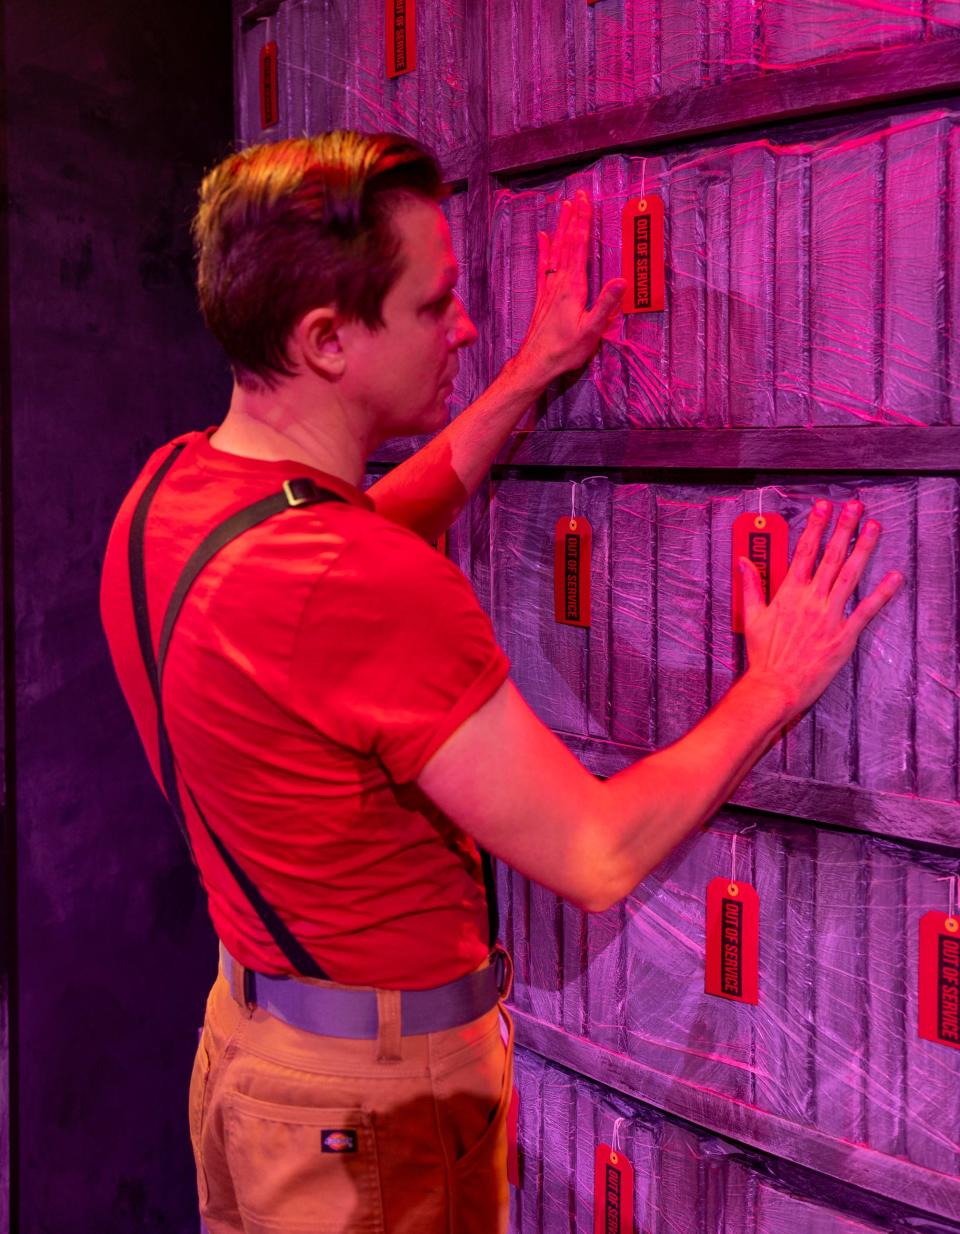 Niall McGinty (Montag) in the Hippodrome Theatre's production of "Fahrenheit 451."